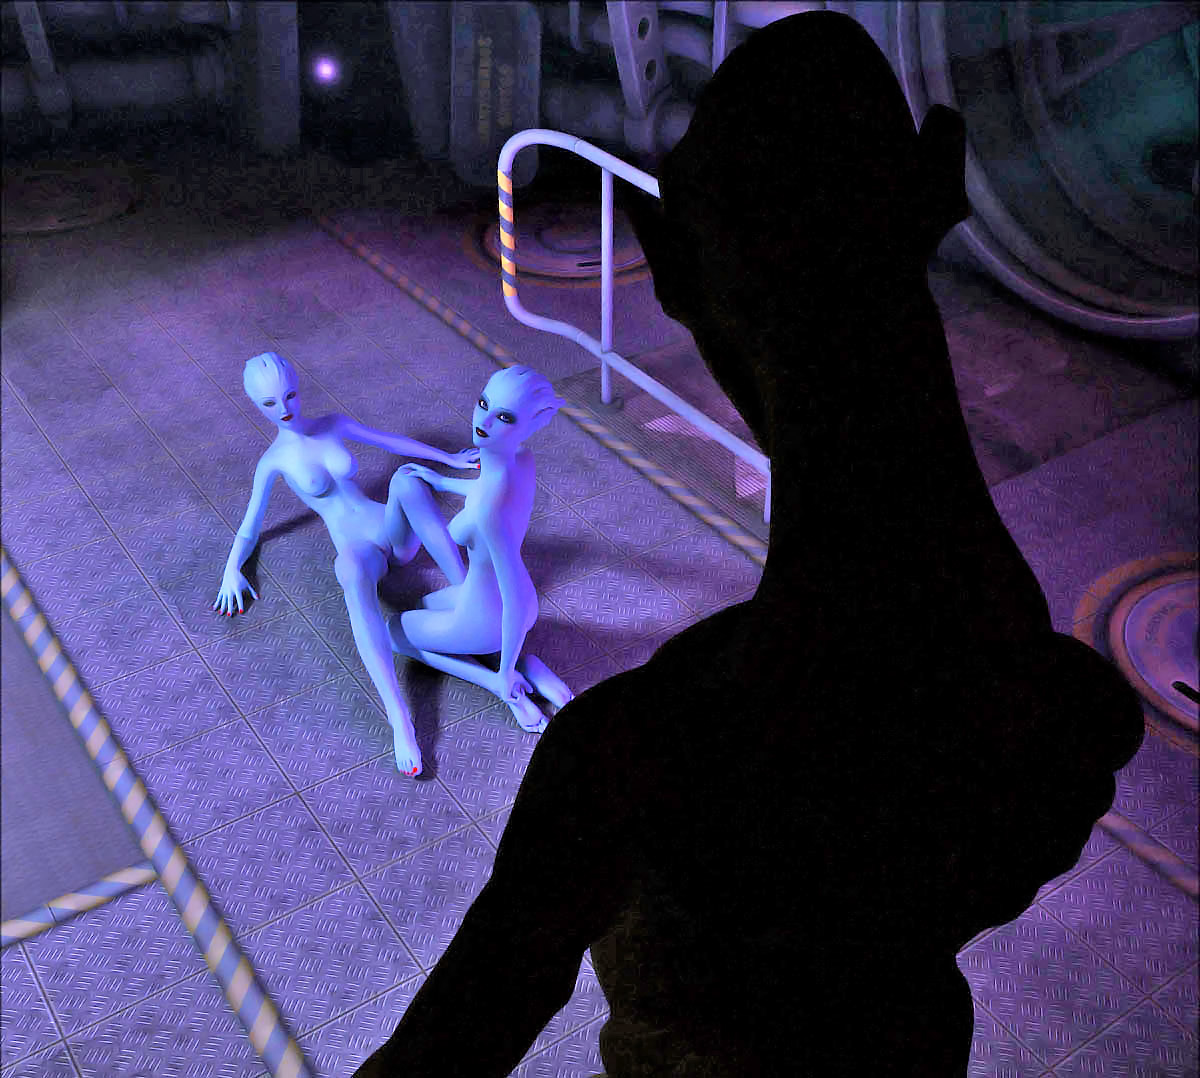 Hot Alien Porn - free 3d alien porn with bitches going down and dirty